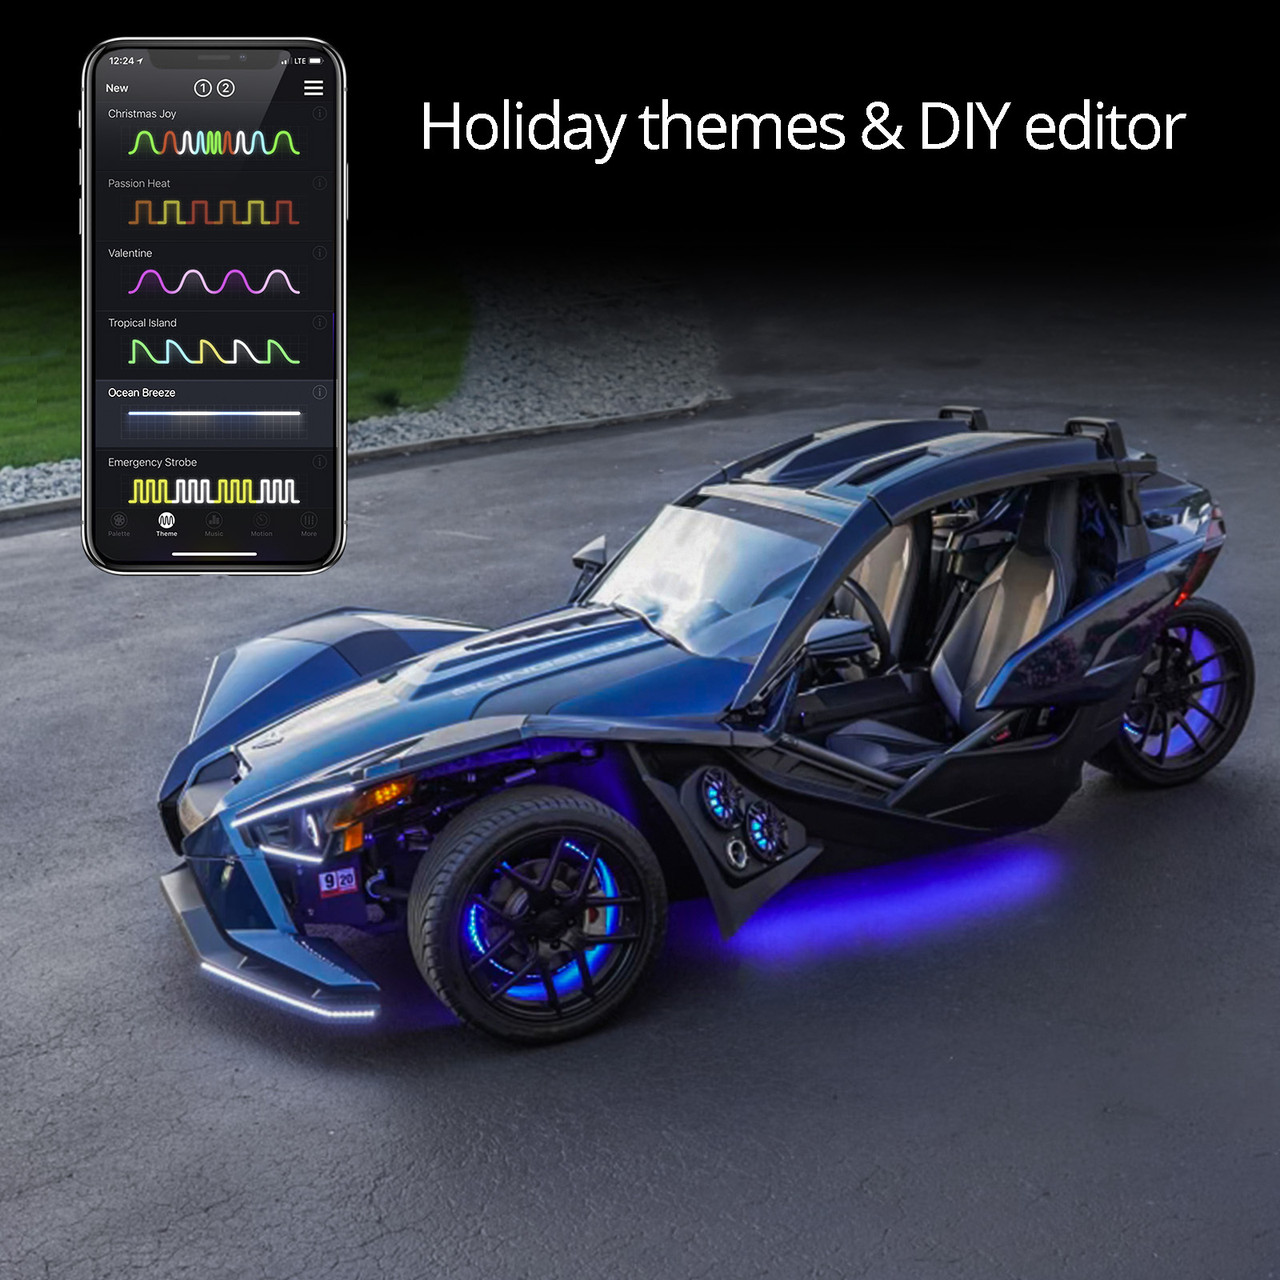 Underglow Lights Give Your Car a Special Glow -  Motors Blog